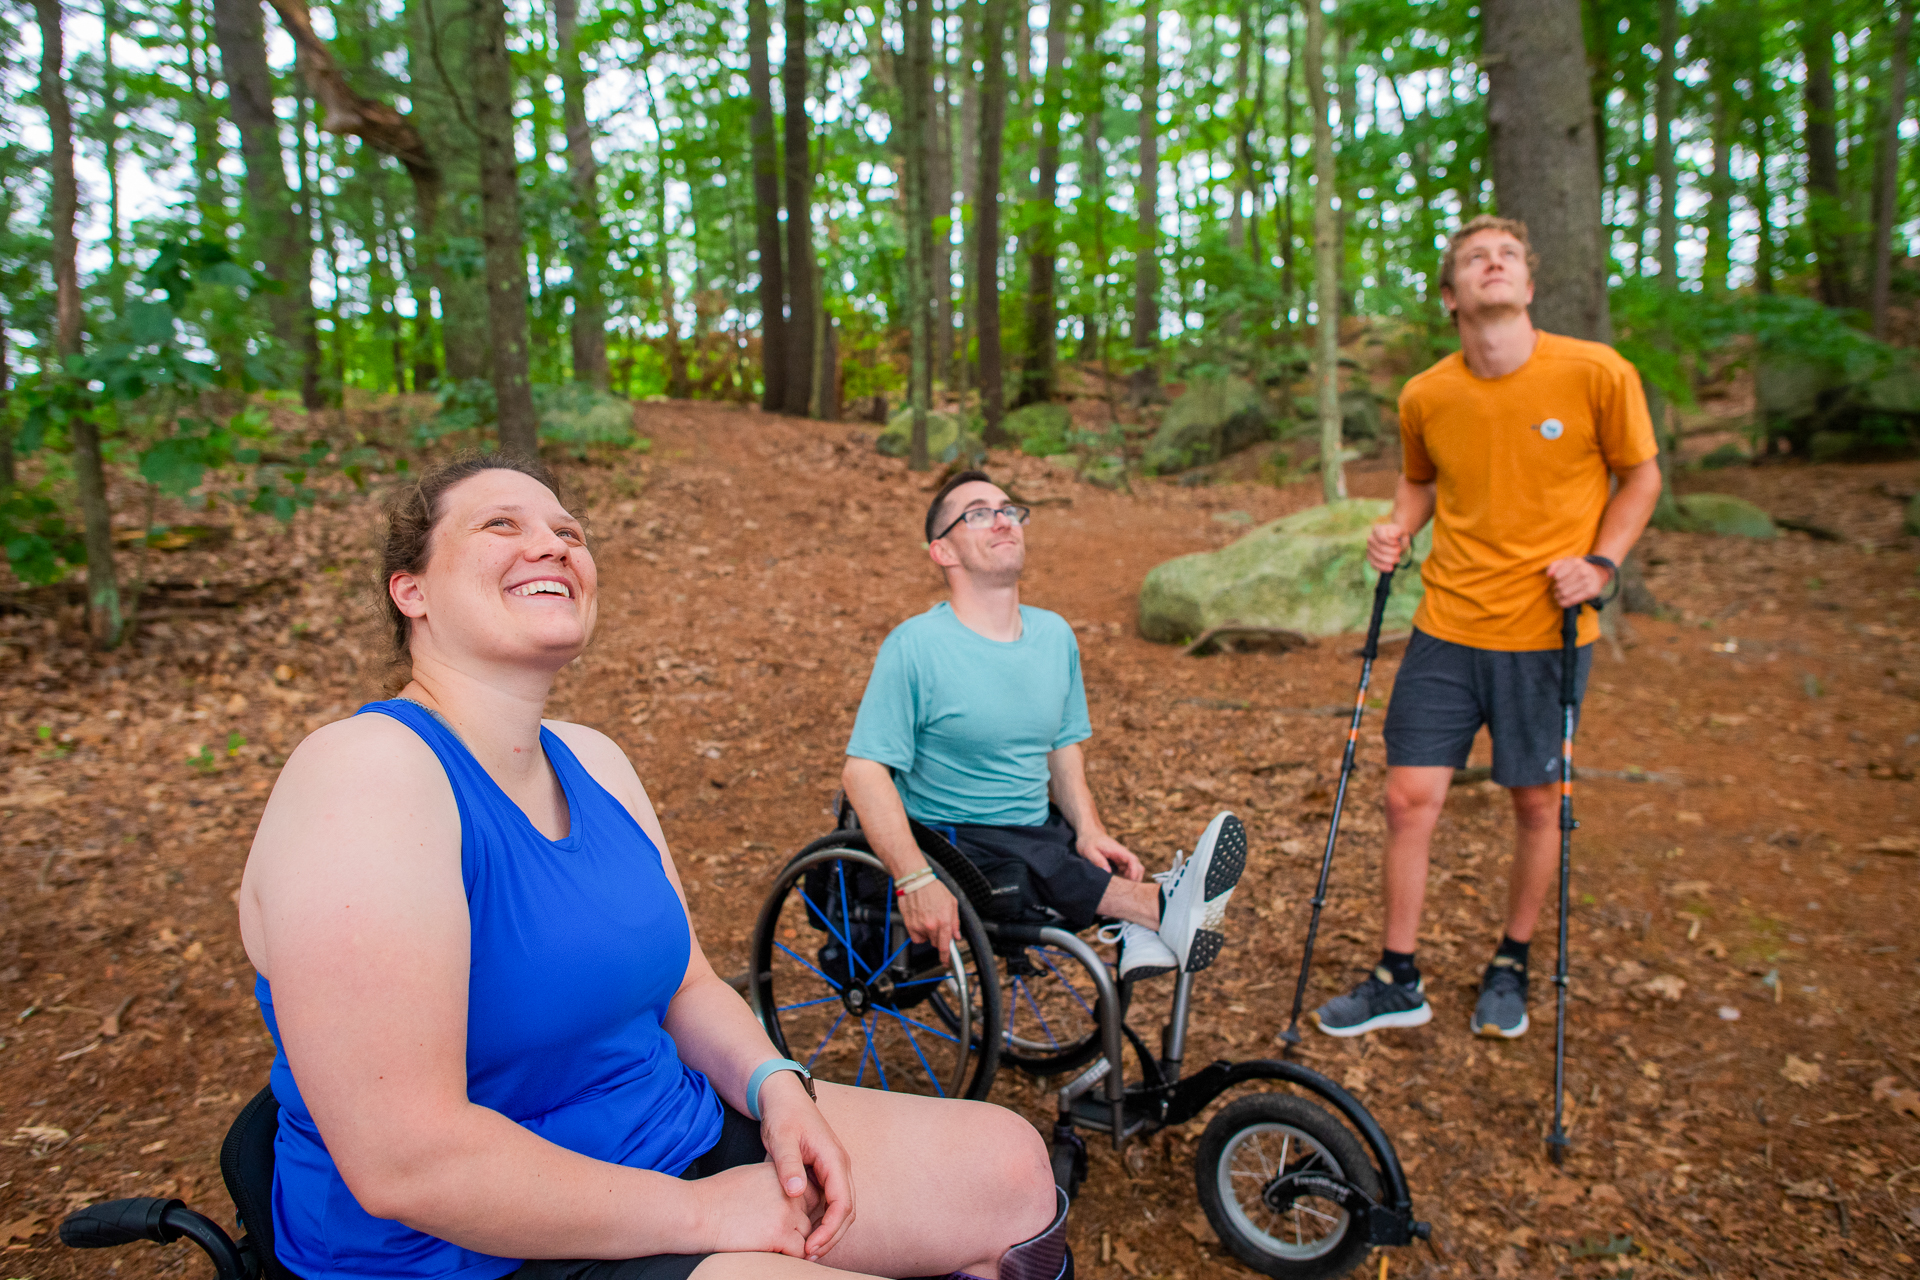 Three people in a forest, two using wheelchairs and one using trekking poles, looking up into the canopy and smiling